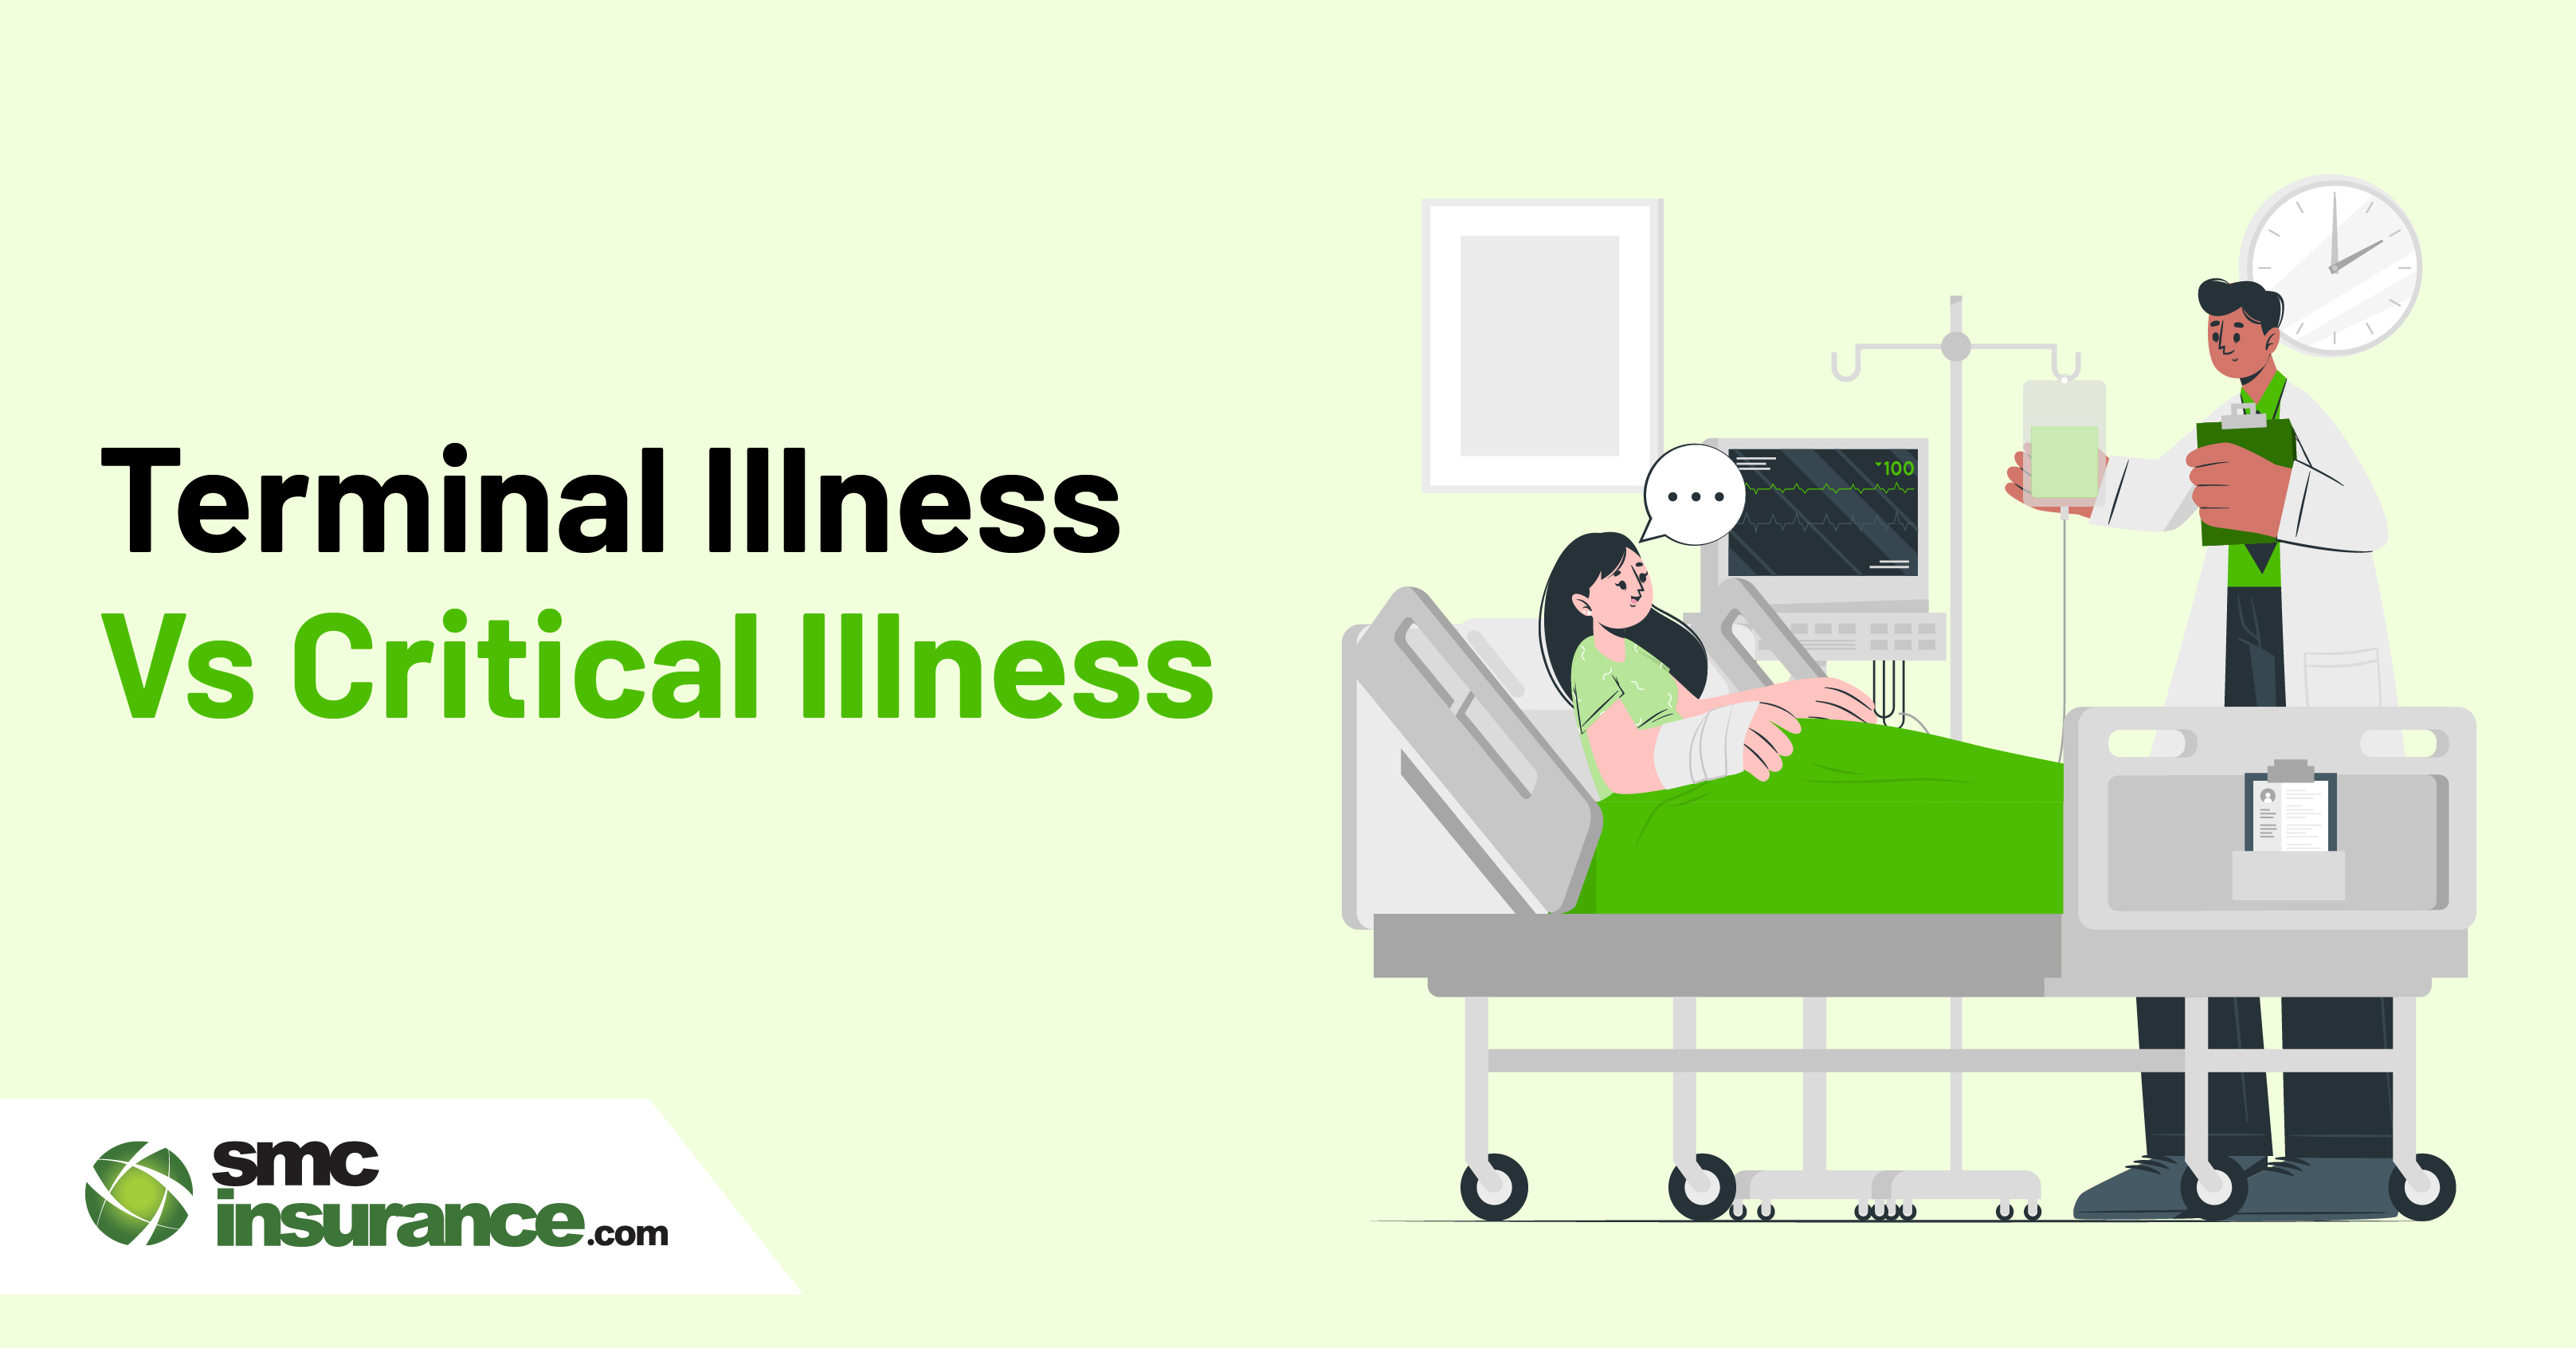 Terminal Illness Vs Critical Illness - What Is The Difference?